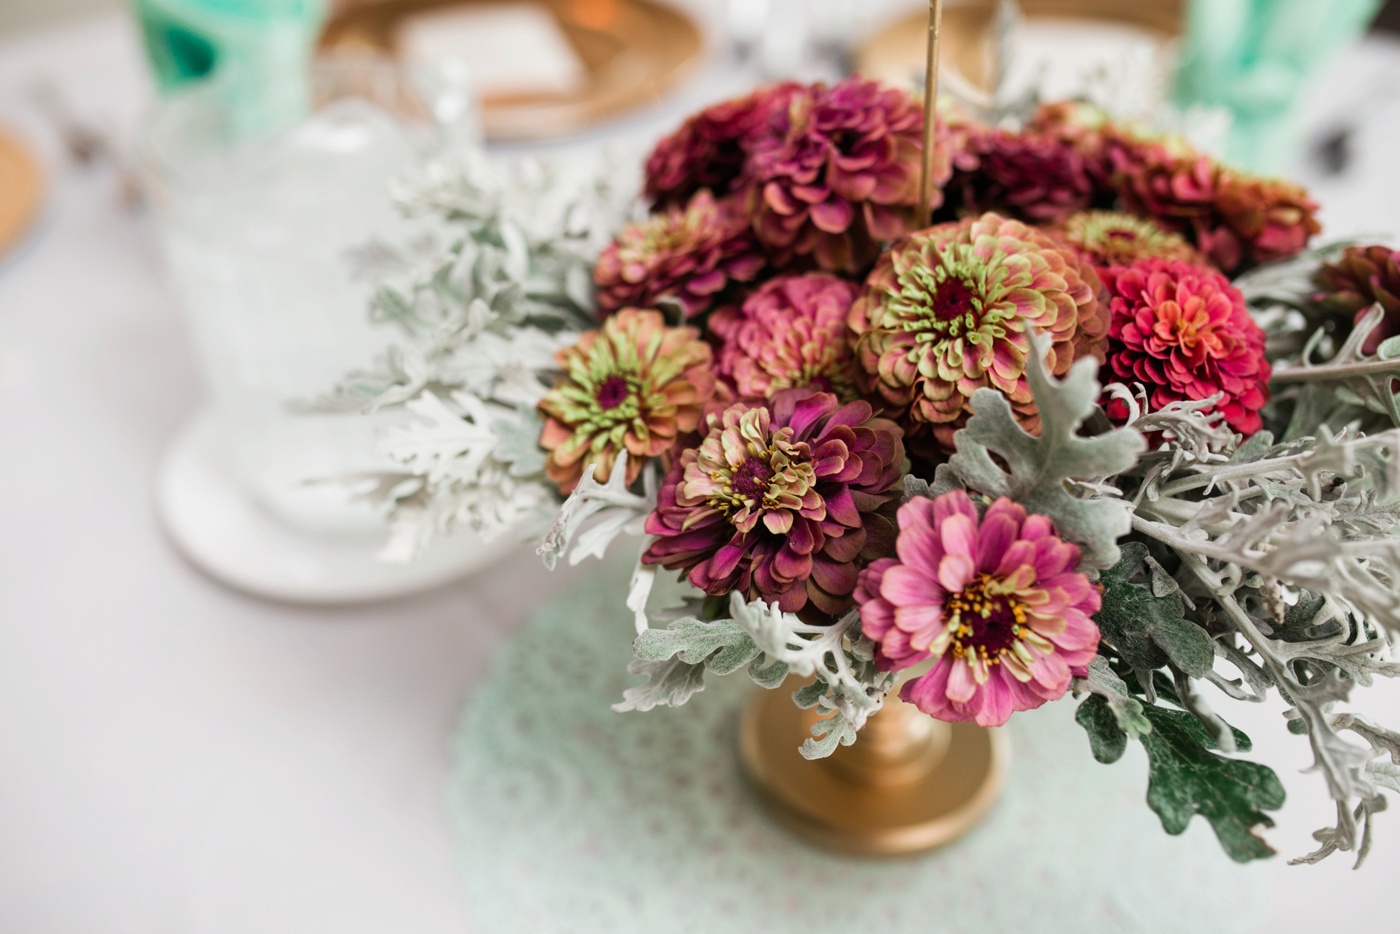 The View - People for People Philadelphia Ballroom Wedding Reception - Chicory Florals photo